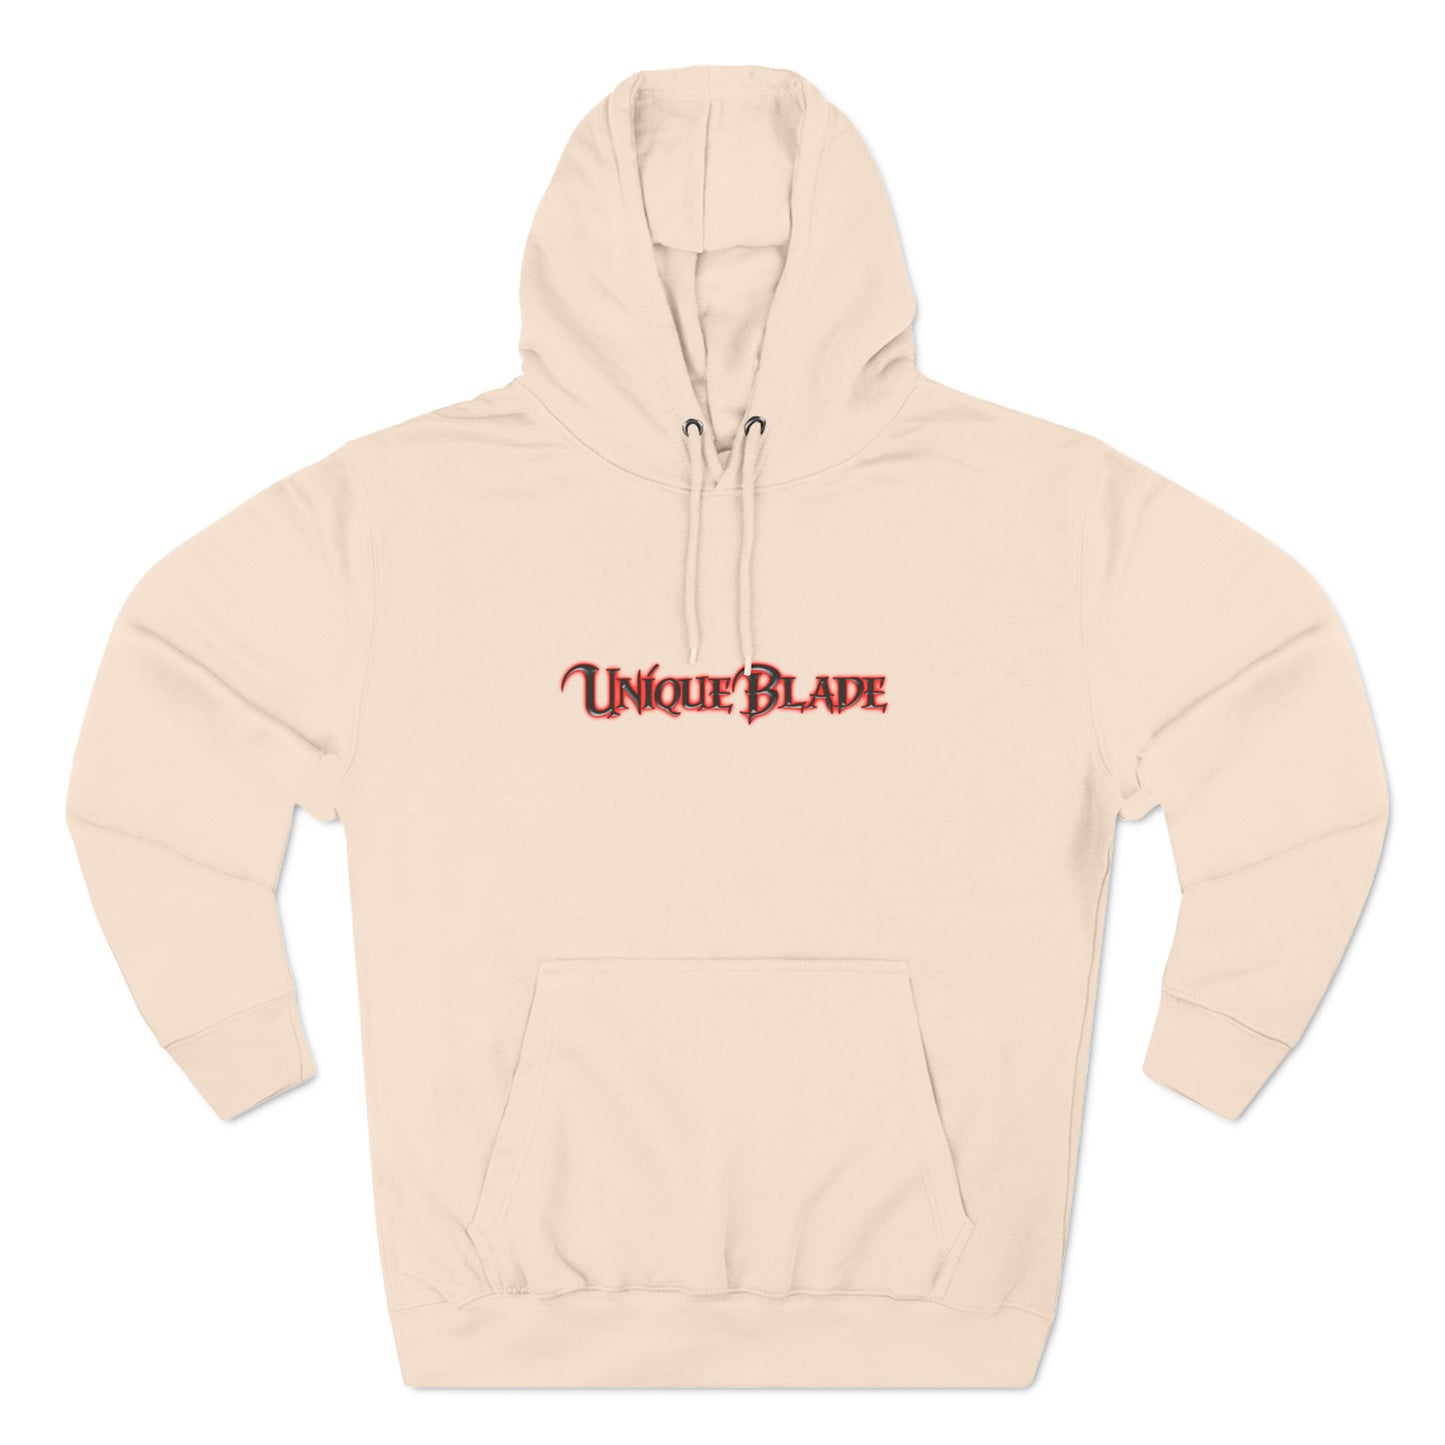 Unisex Premium Pullover Hoodie - High-quality and versatile hoodie suitable for both men and women, offering comfort and style for various occasions.